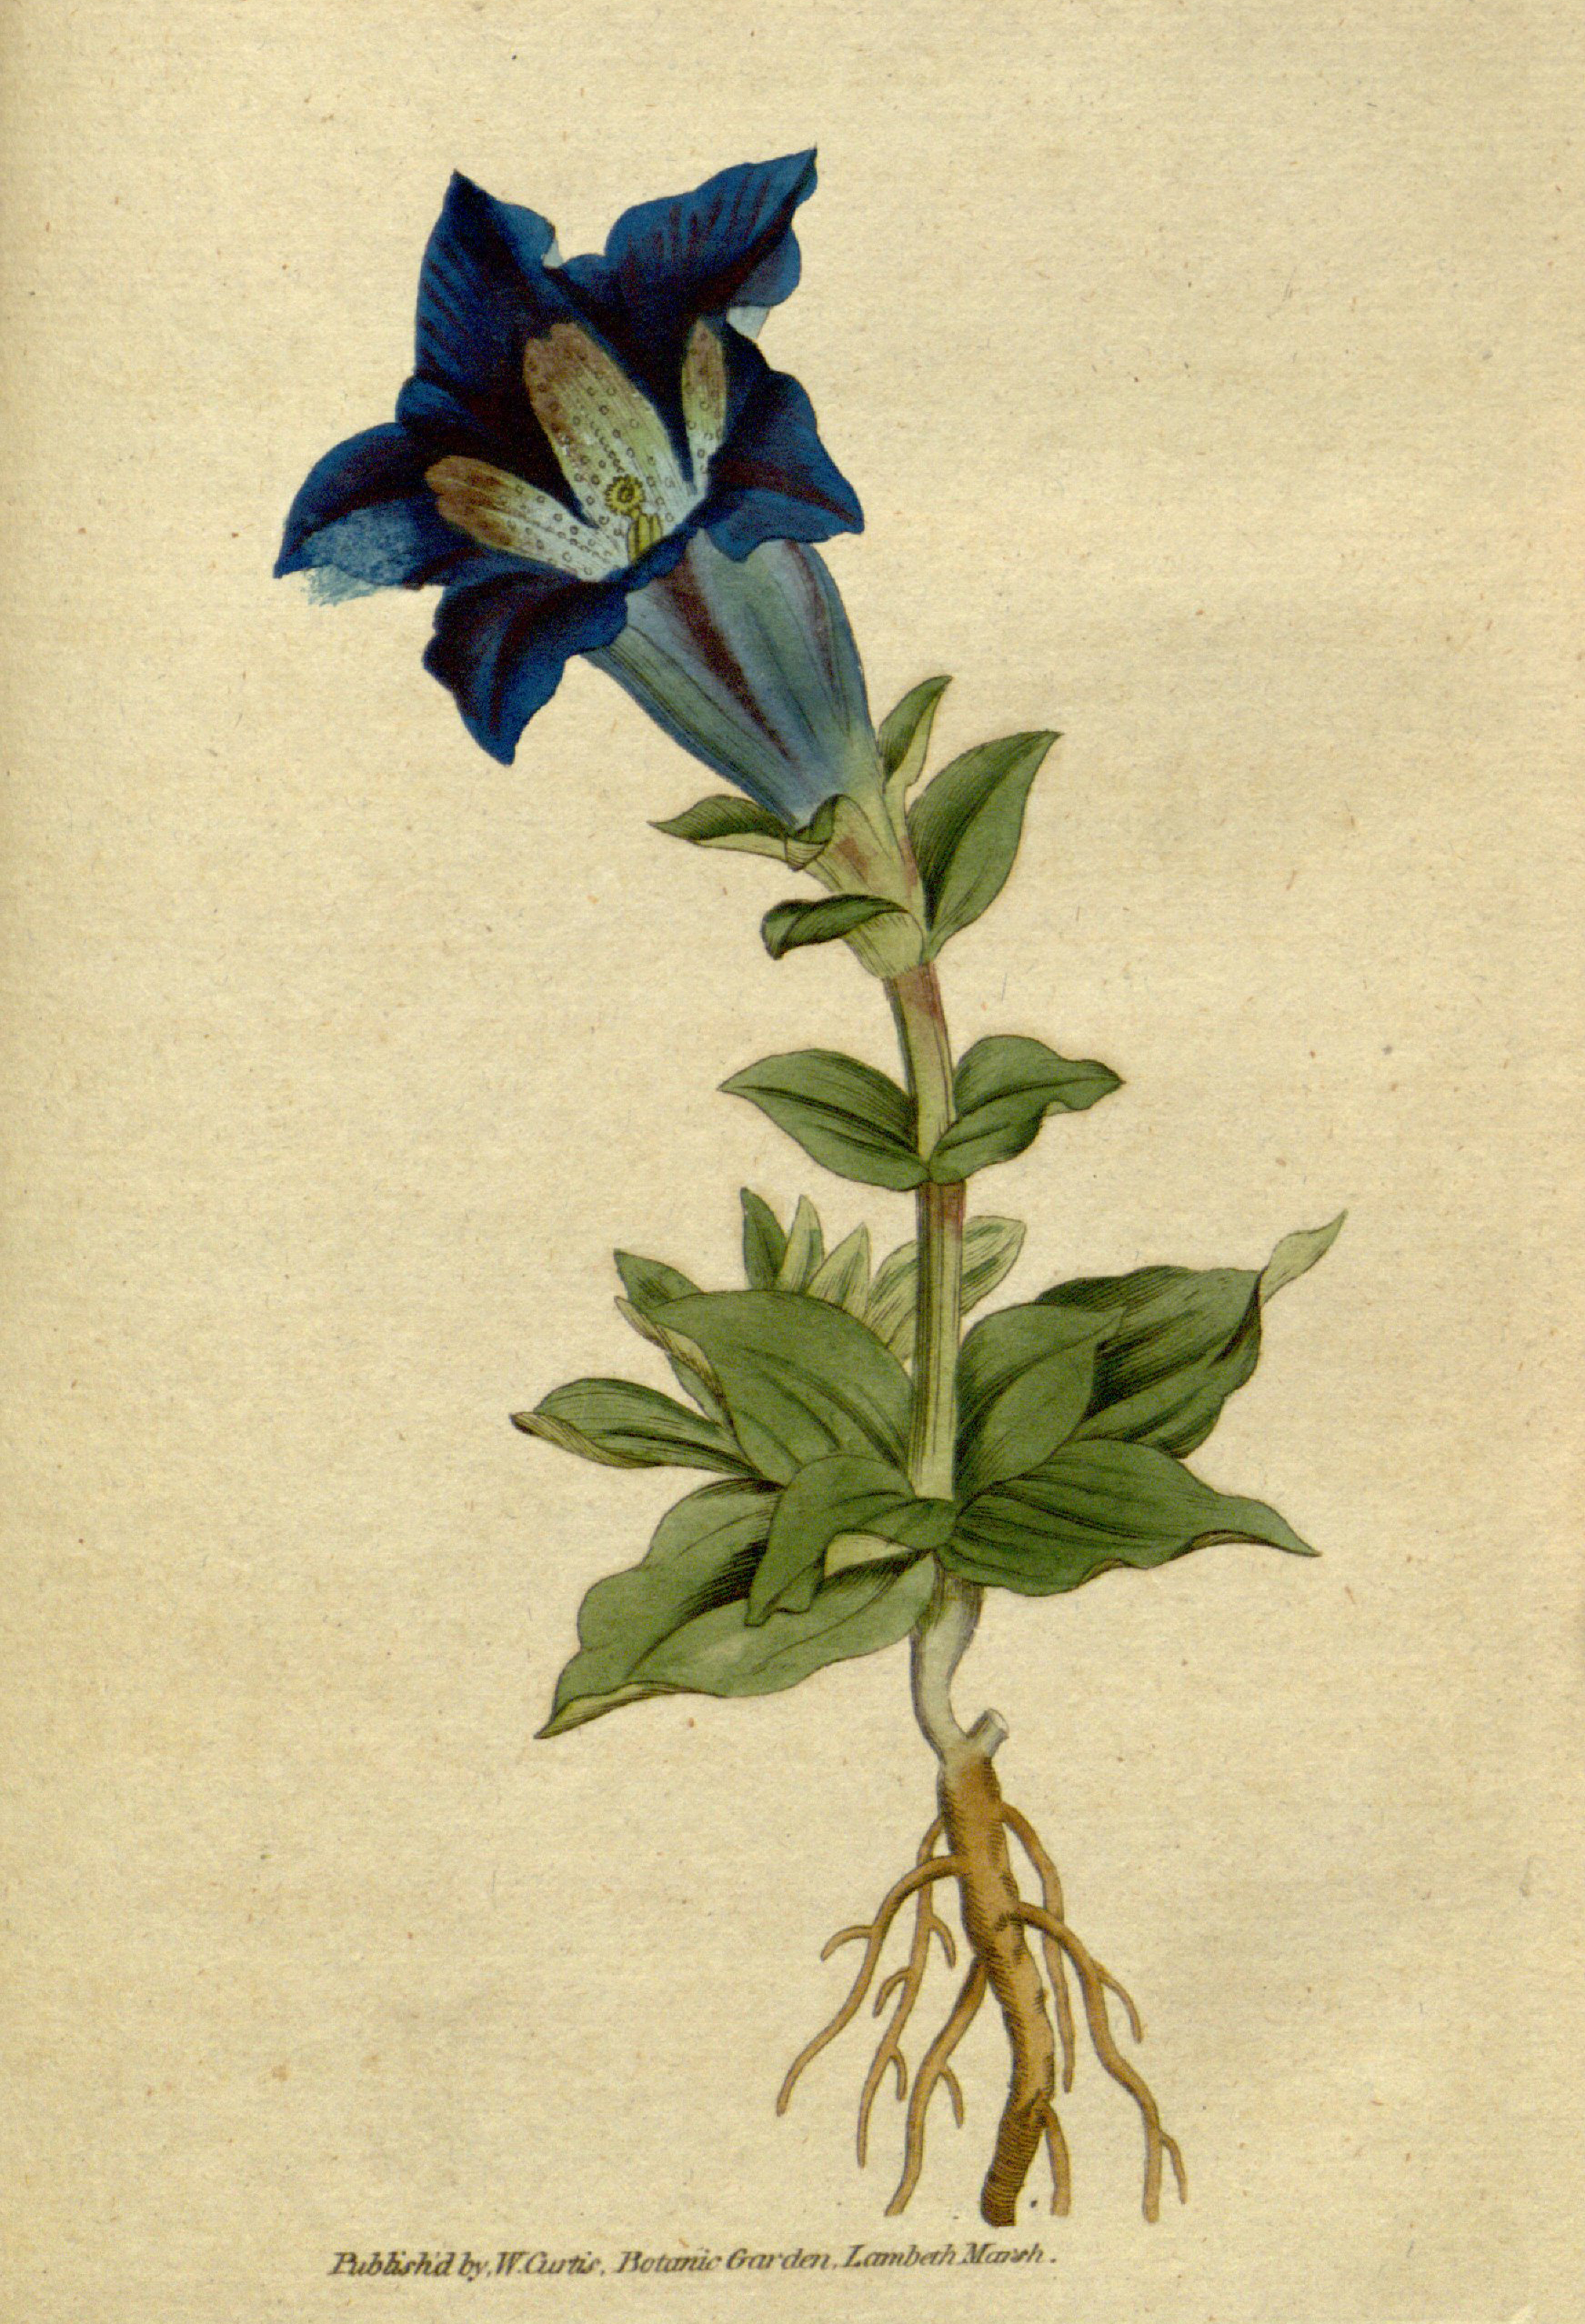 Colored illustration of a dark blue bloom with thick green leaves.